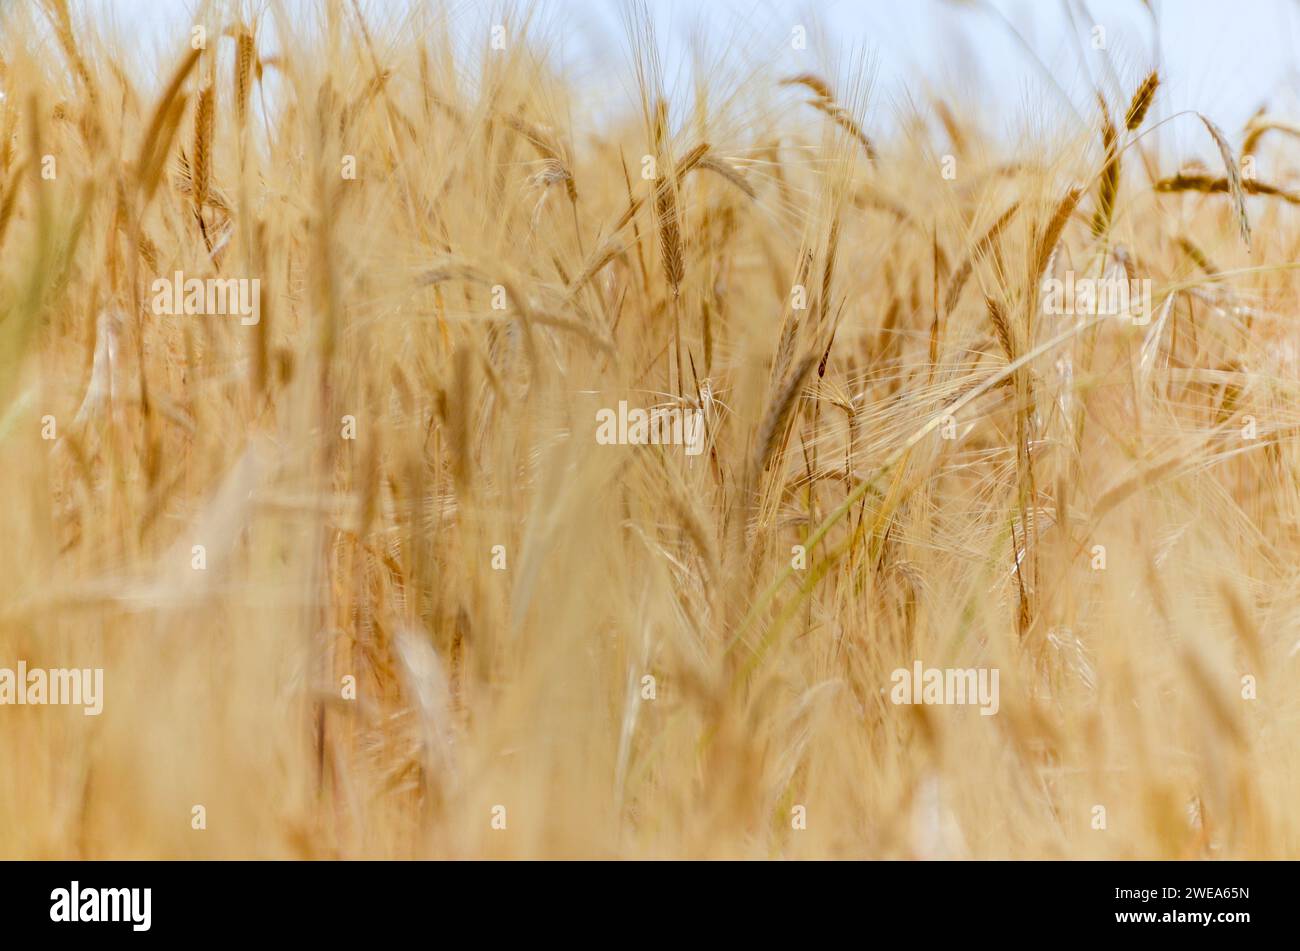 Close-up view of golden wheat field with ripe ears of wheat blowing in the wind in Turkey Stock Photo